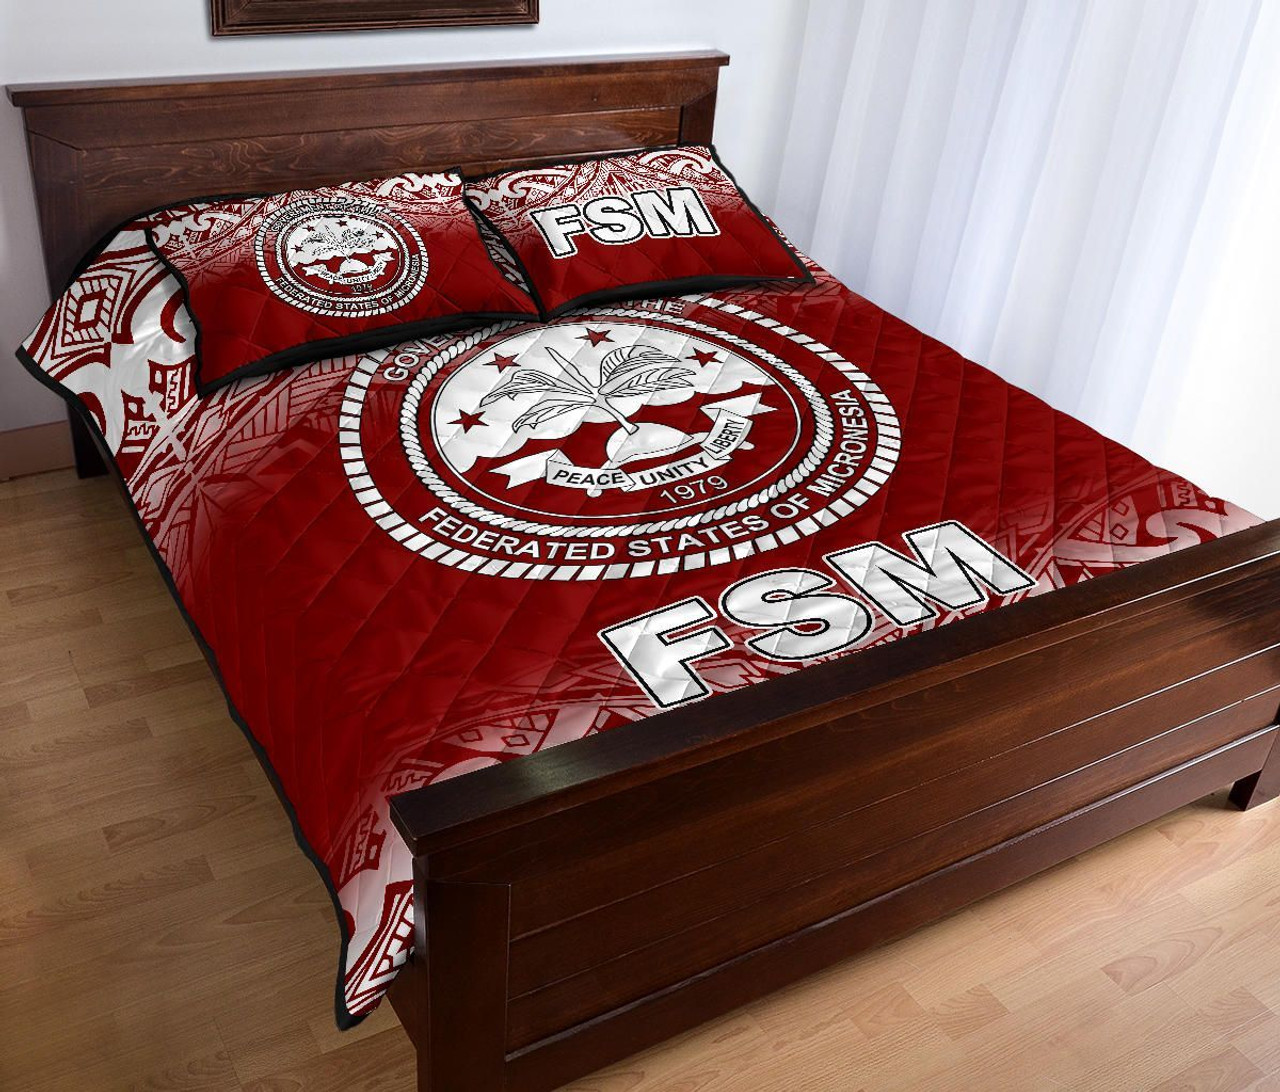 Federated States of Micronesia Quilt Bed Set - Federated States of Micronesia Seal Red Fog Style 4